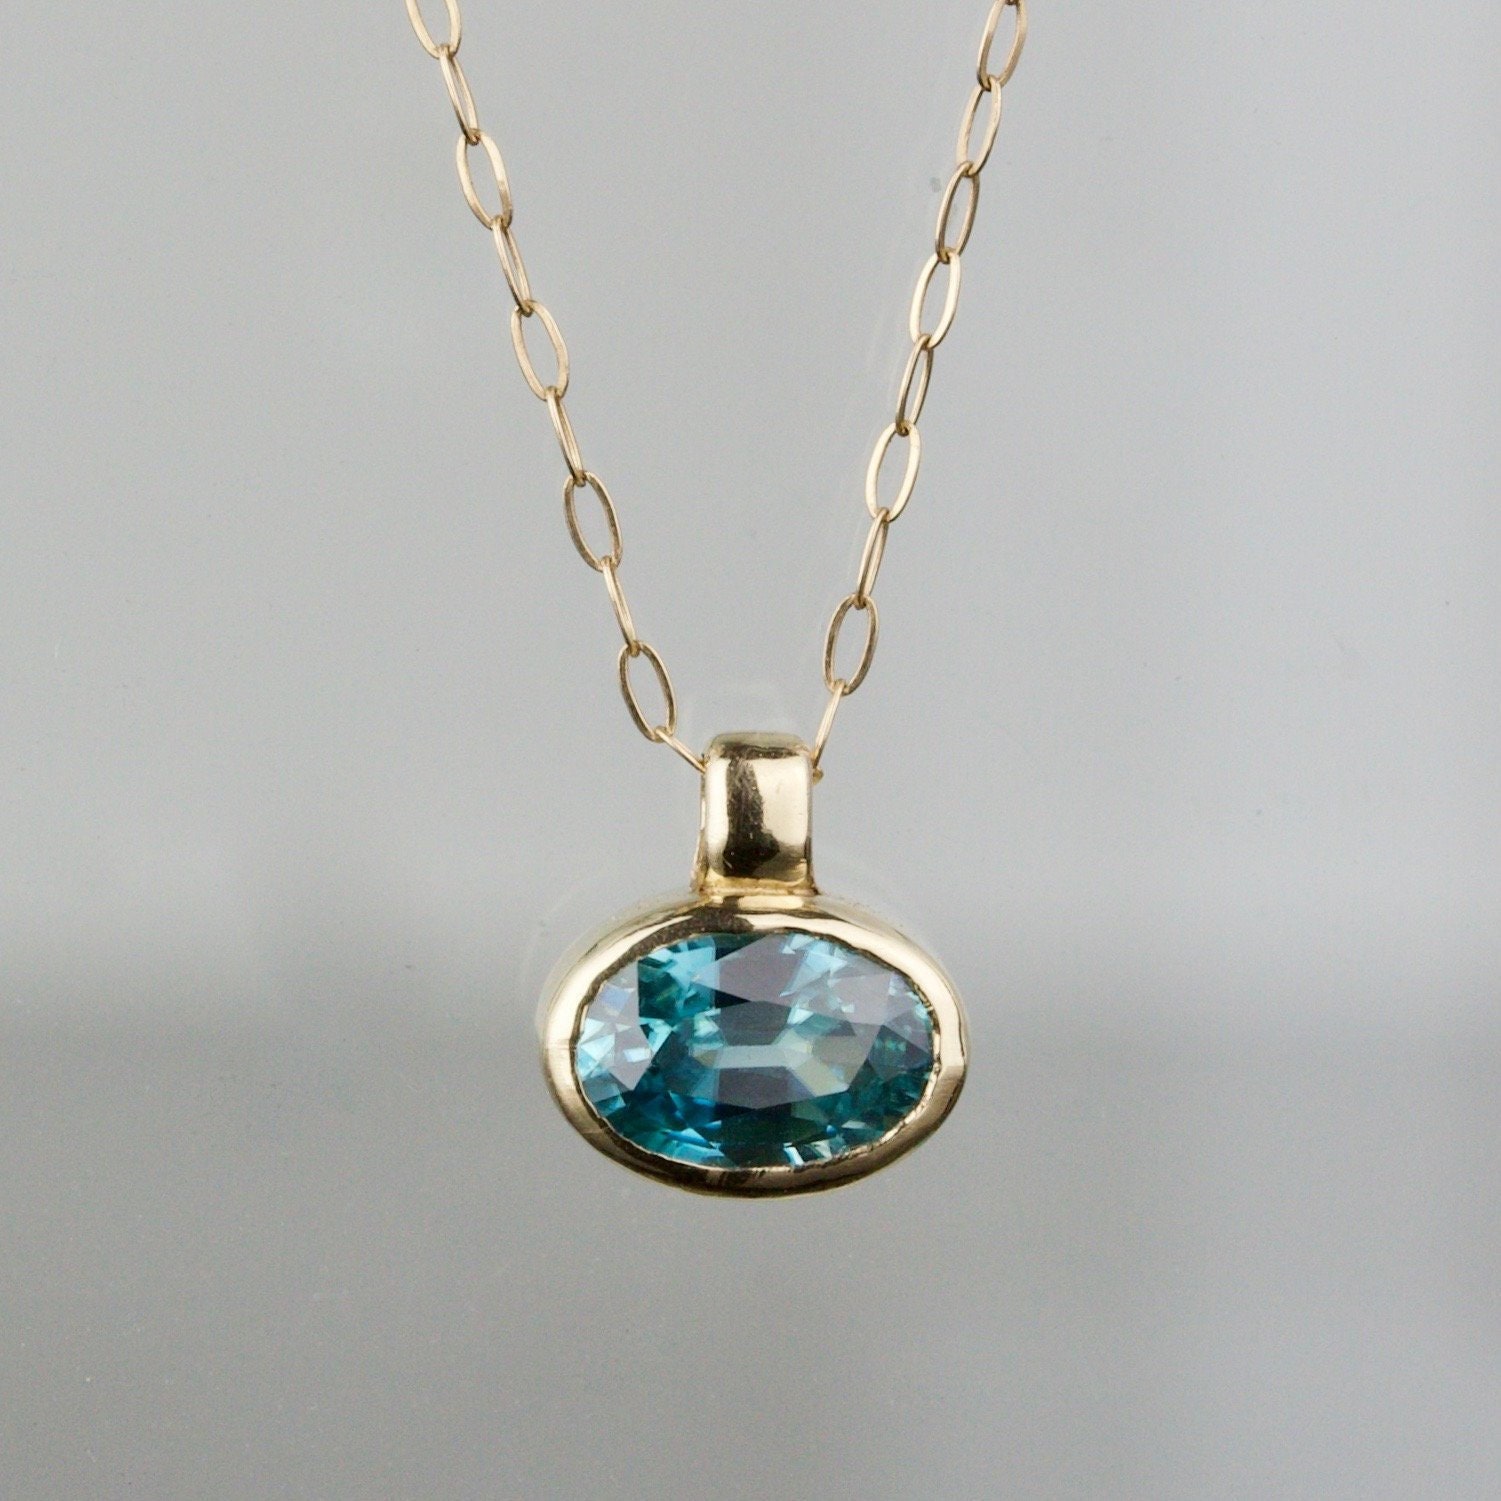 Share more than 149 blue zircon necklace latest